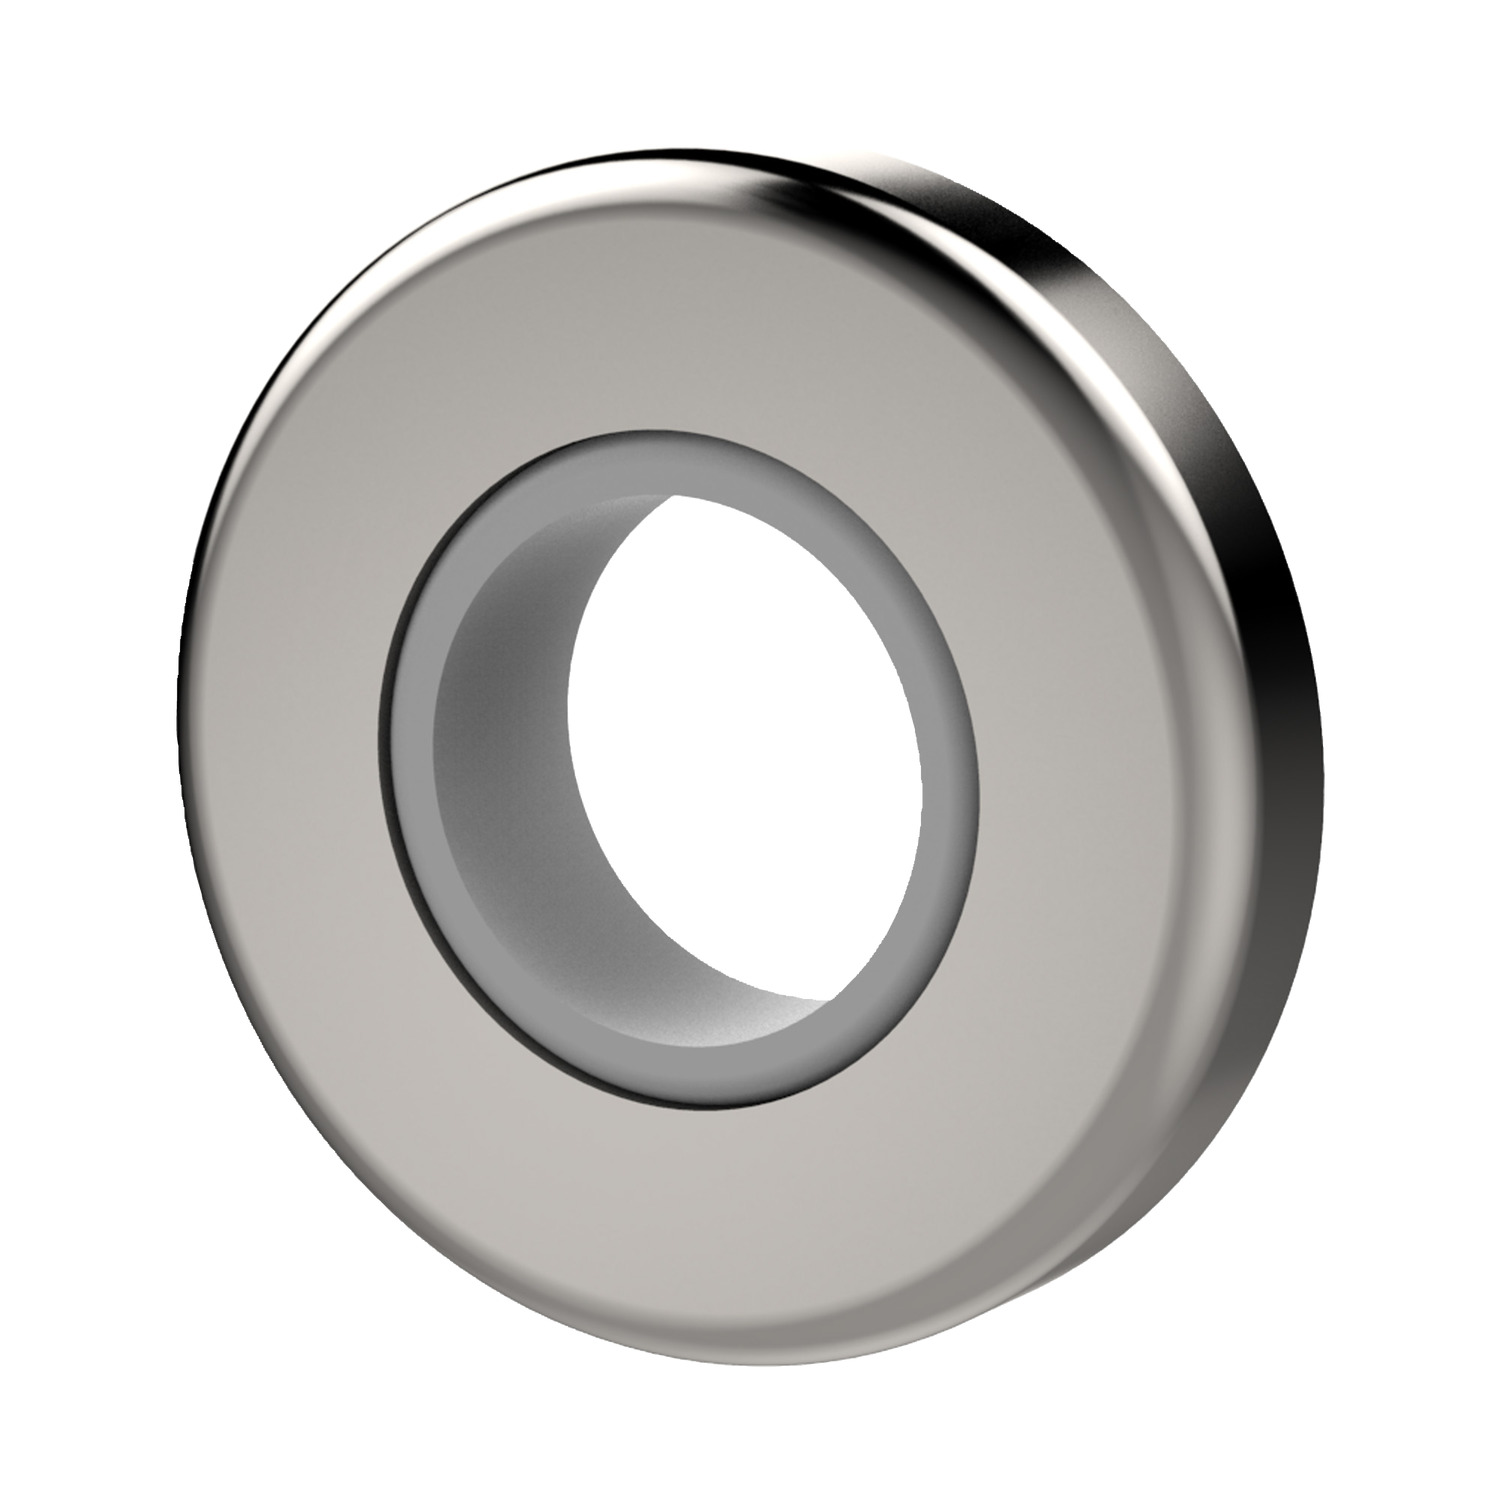 Product P0181, Waterproof Seal Washers 304 stainless steel / 